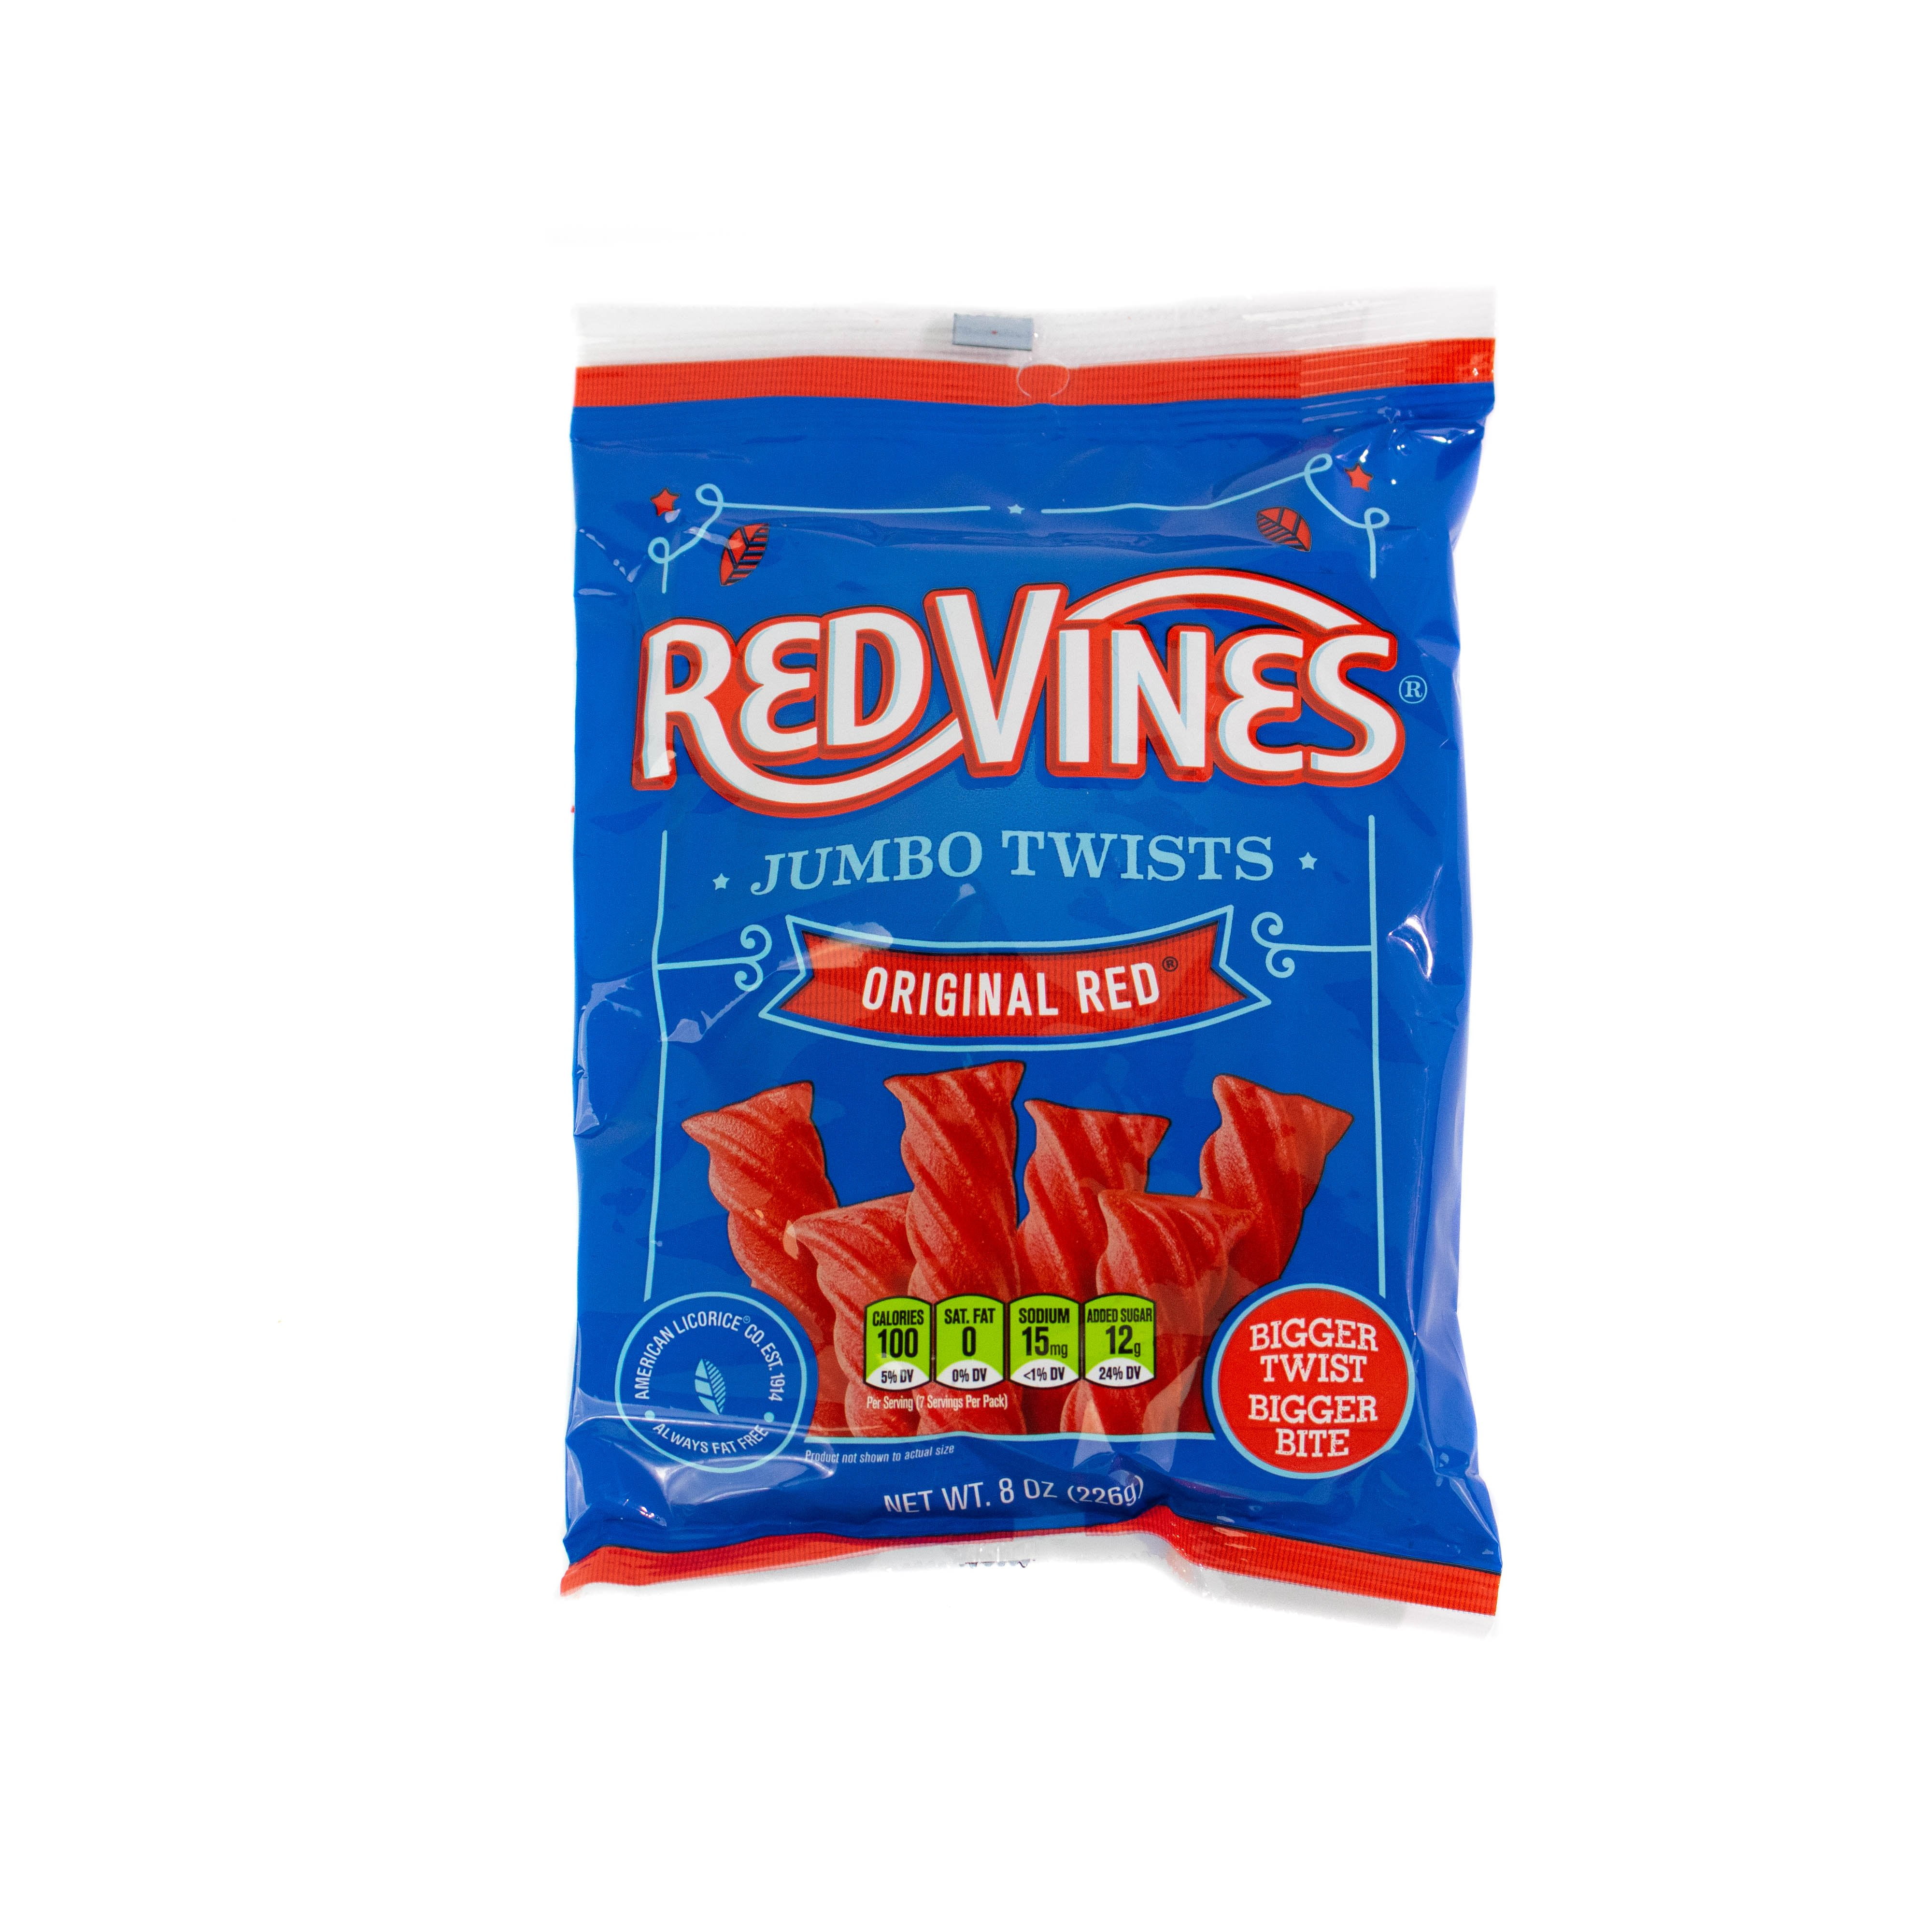 Red Vines Jumbo Twists, Original Red Chewy Candy, 8oz Bag